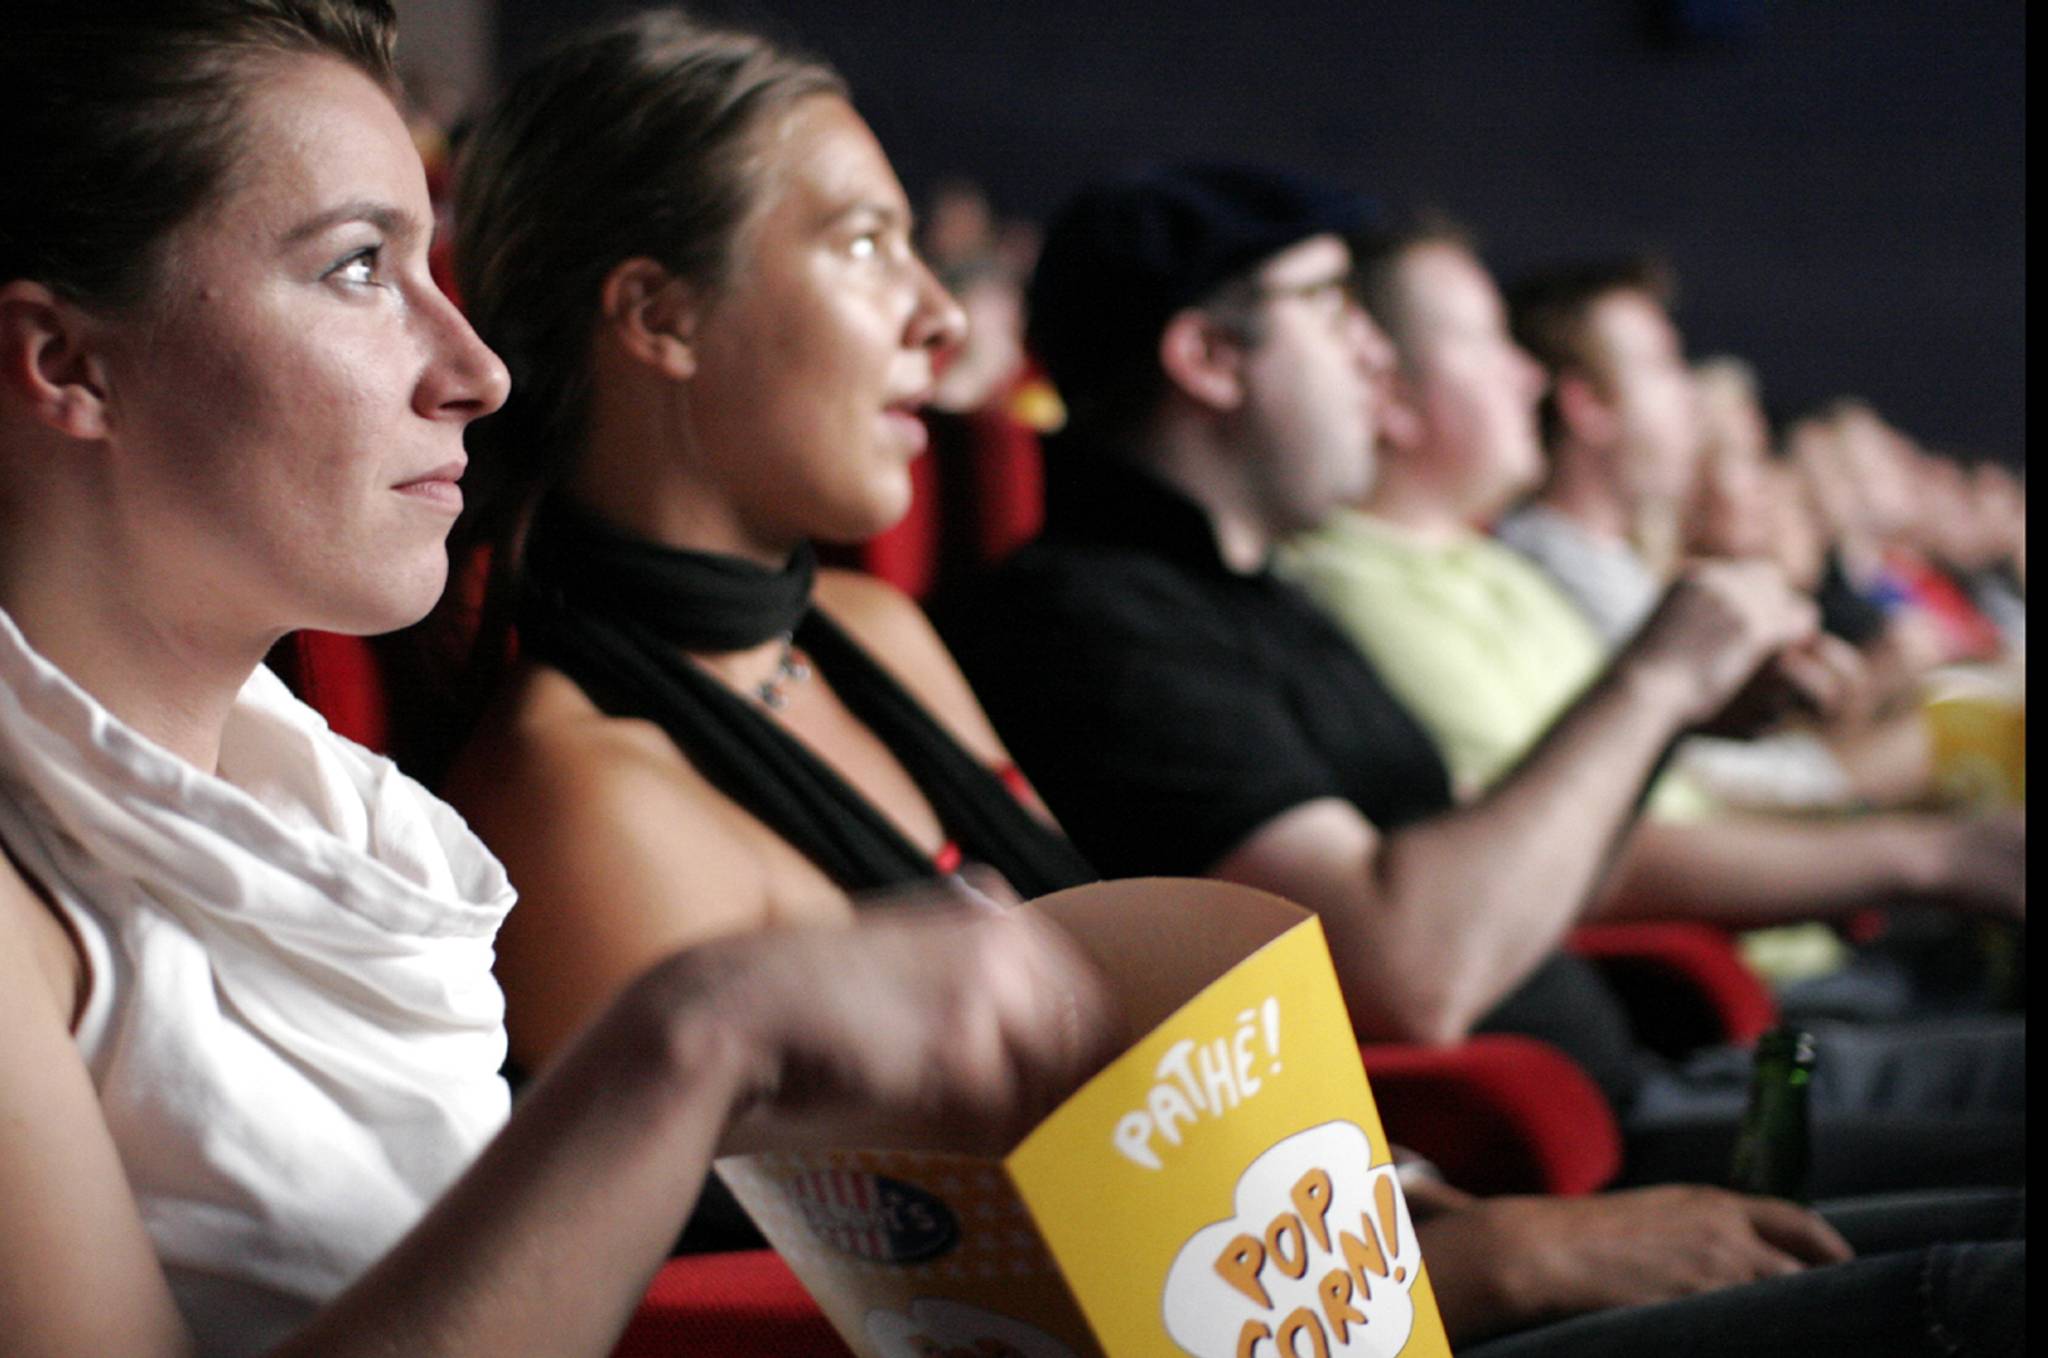 People want variable pricing at the cinema